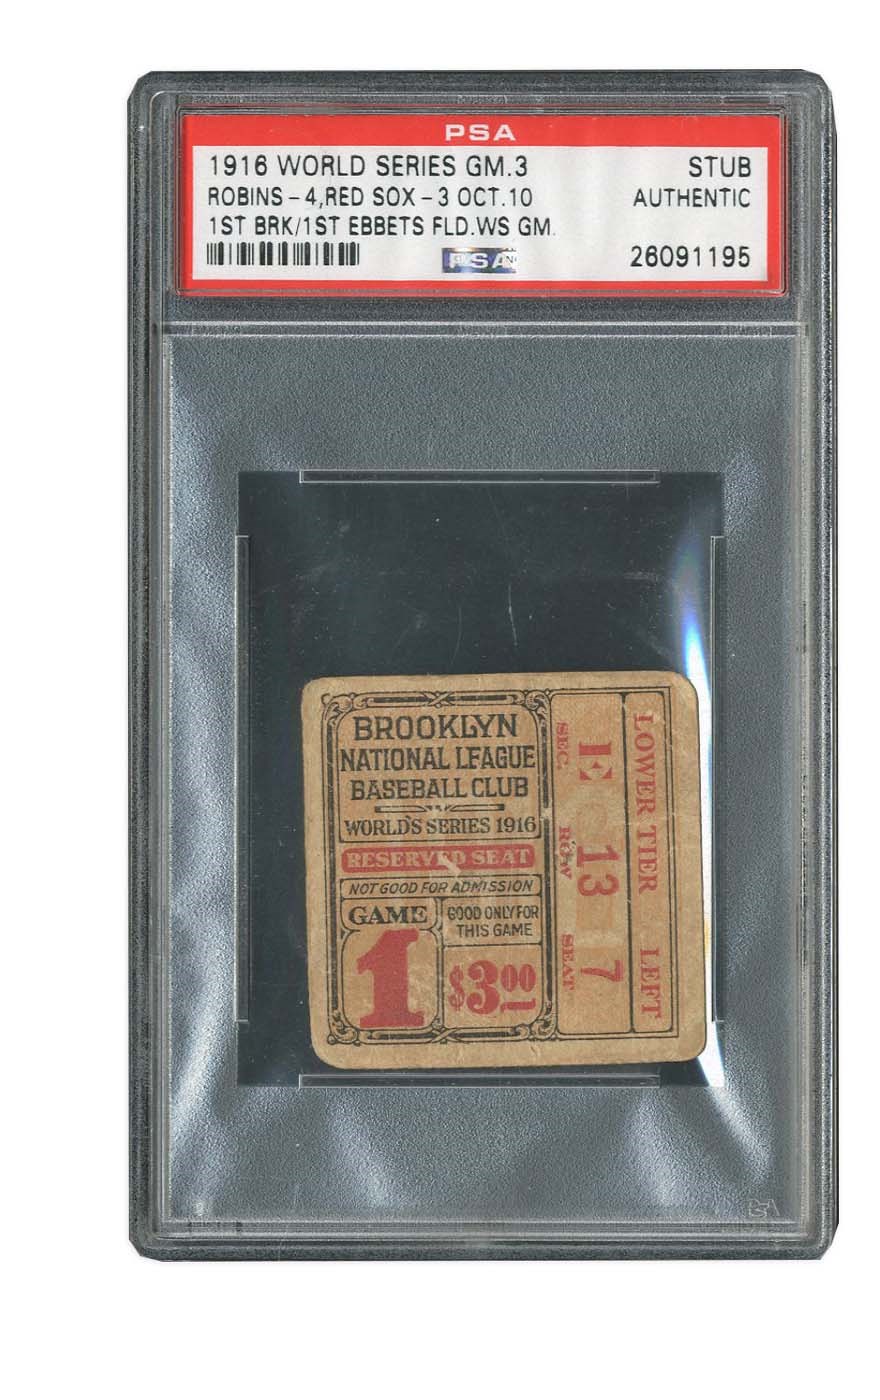 1916 World Series Ticket at Brooklyn (PSA Authentic)